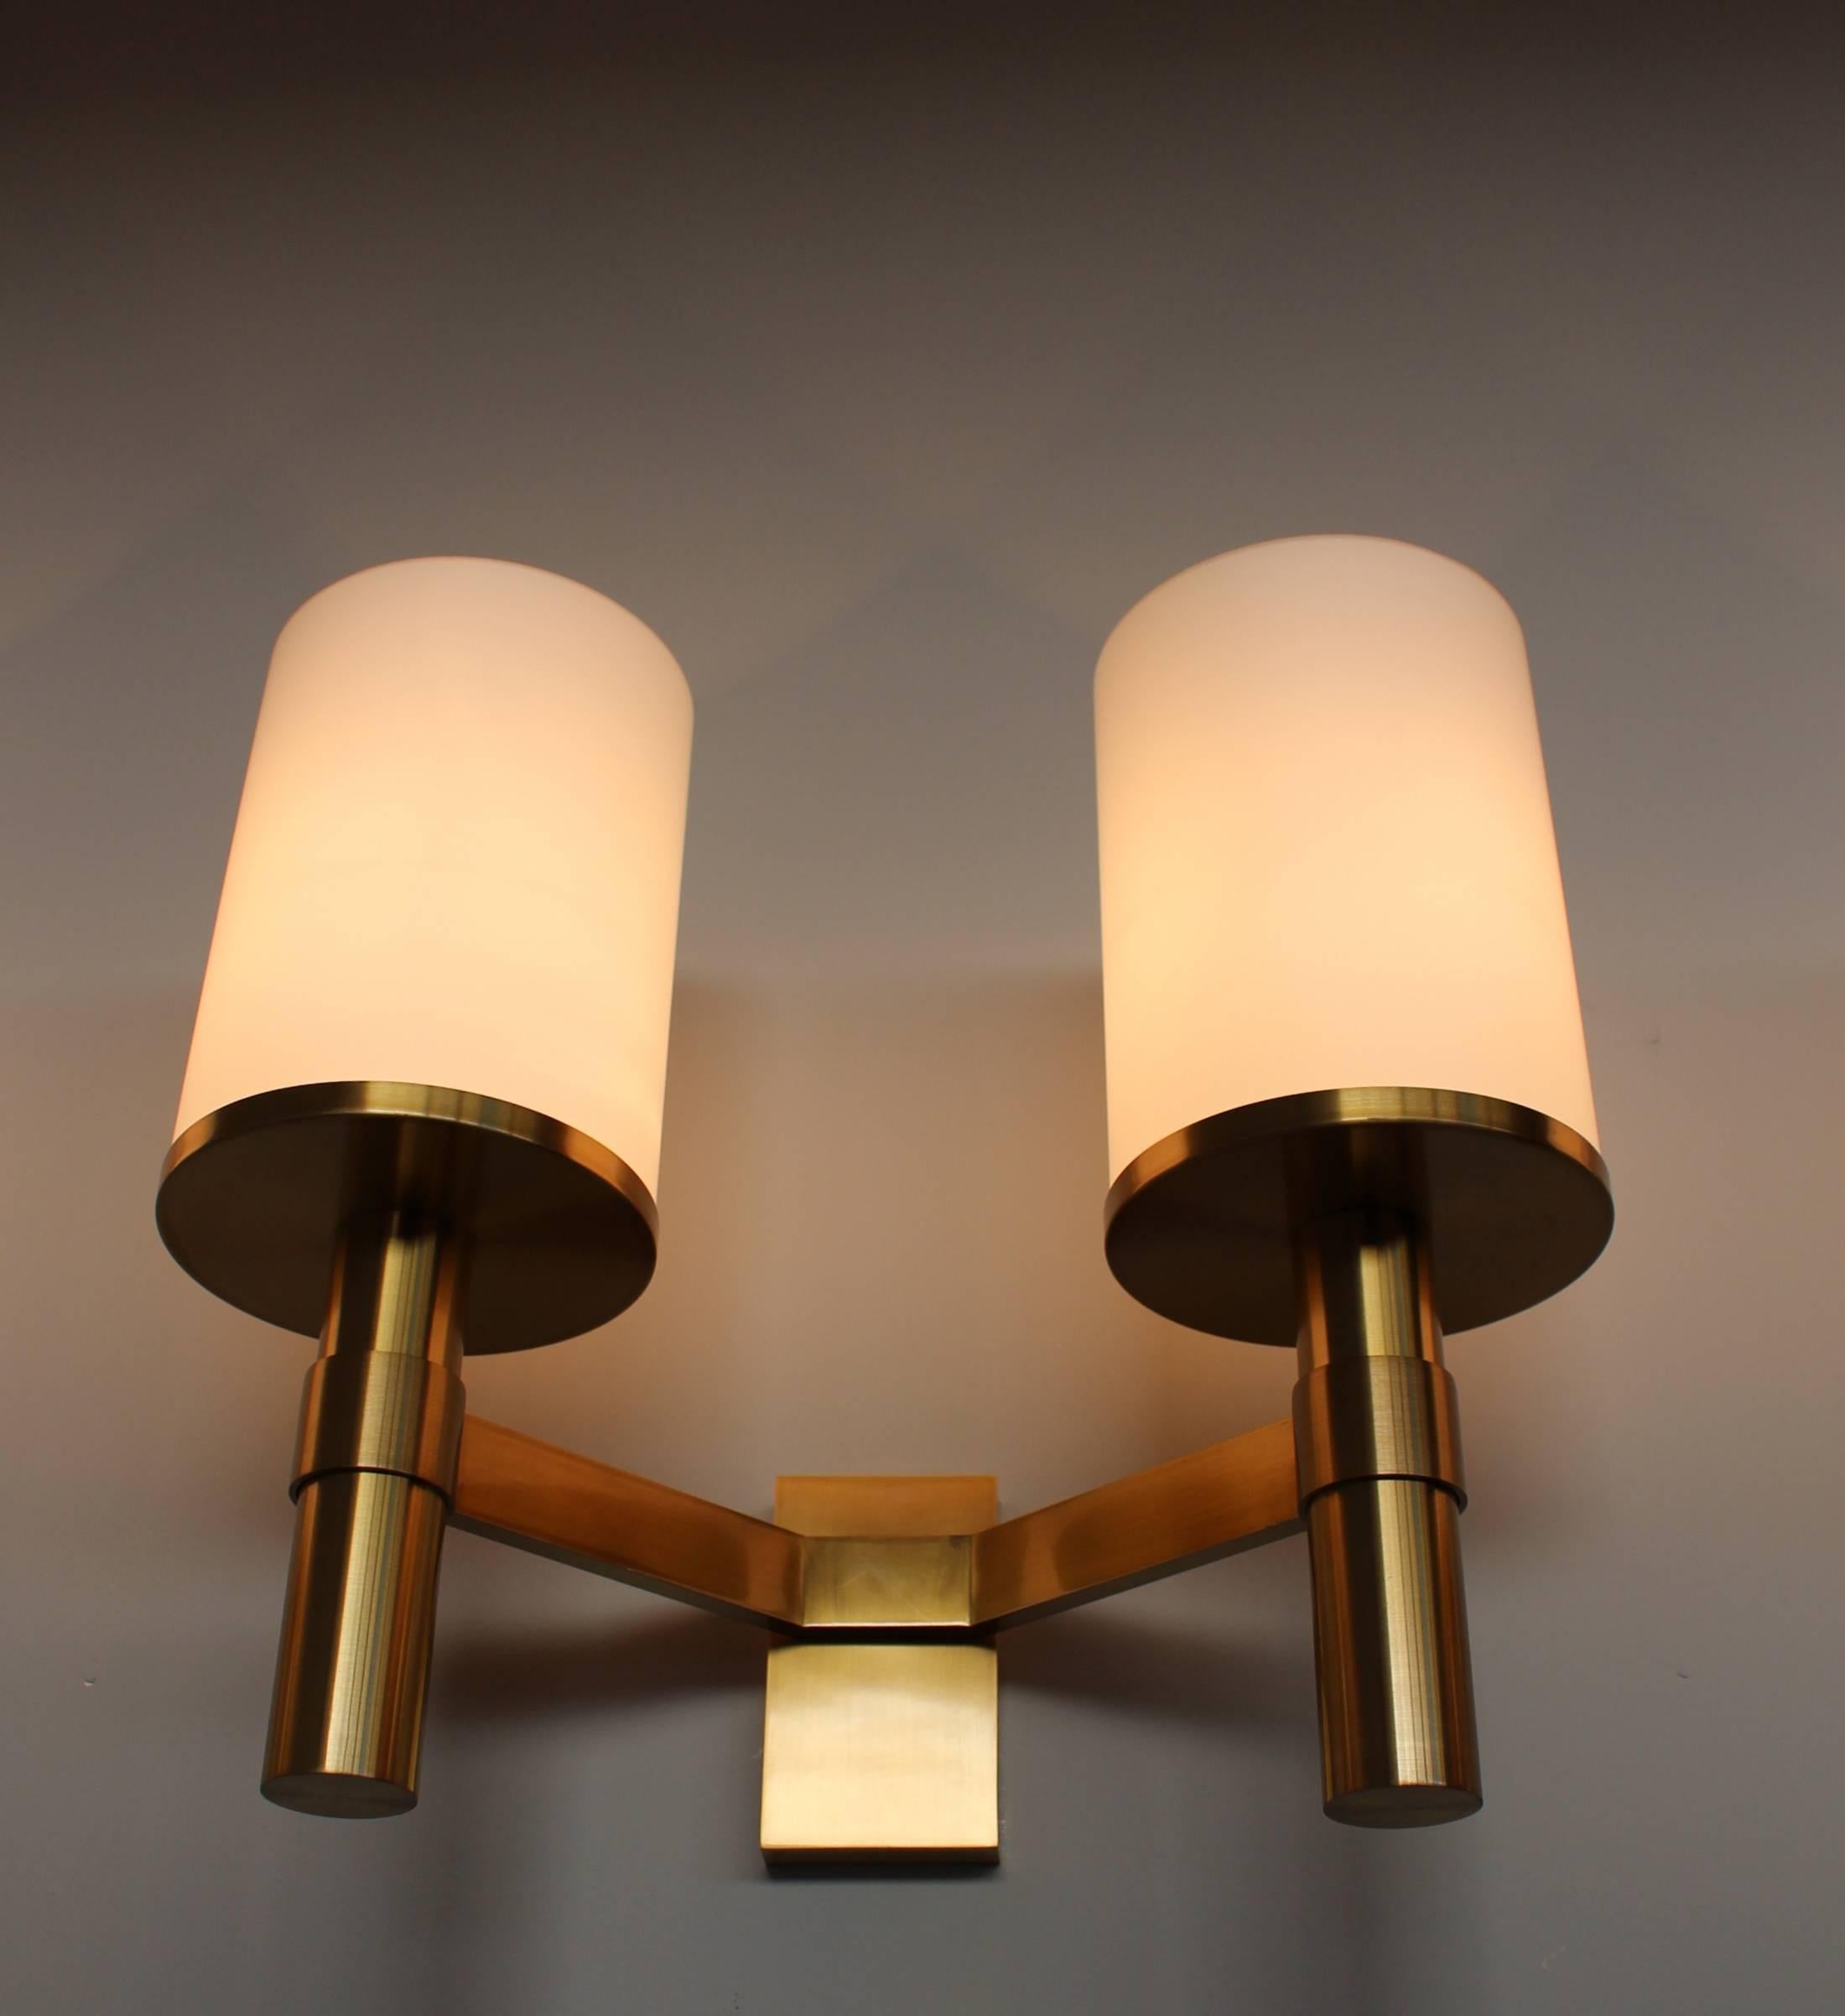 2 Fine French Art Deco Bronze and Glass Sconces by Jean Perzel For Sale 3